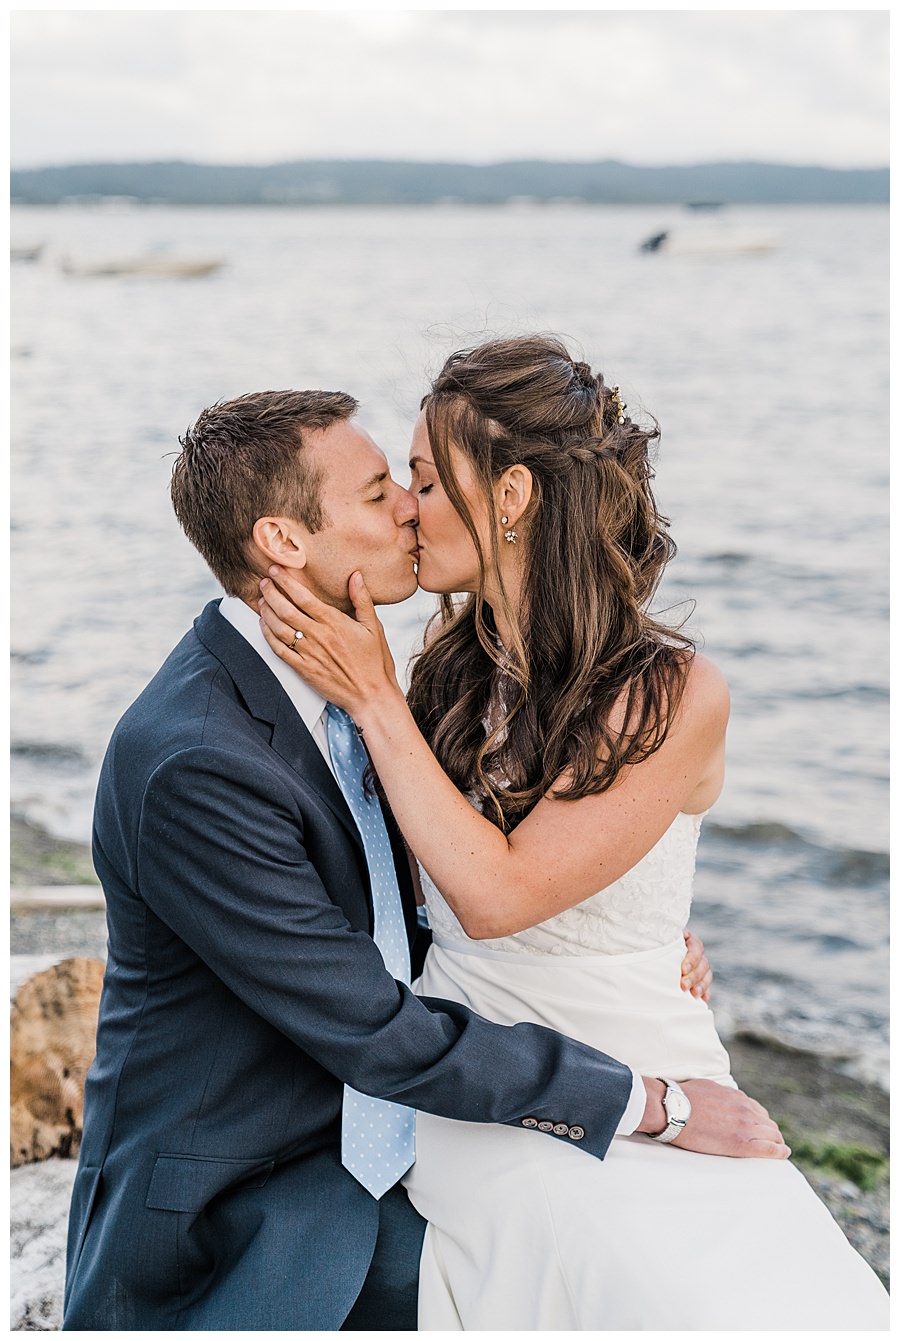 A bride and groom kiss after their Camano Island elopement photographed by Amy Galbraith